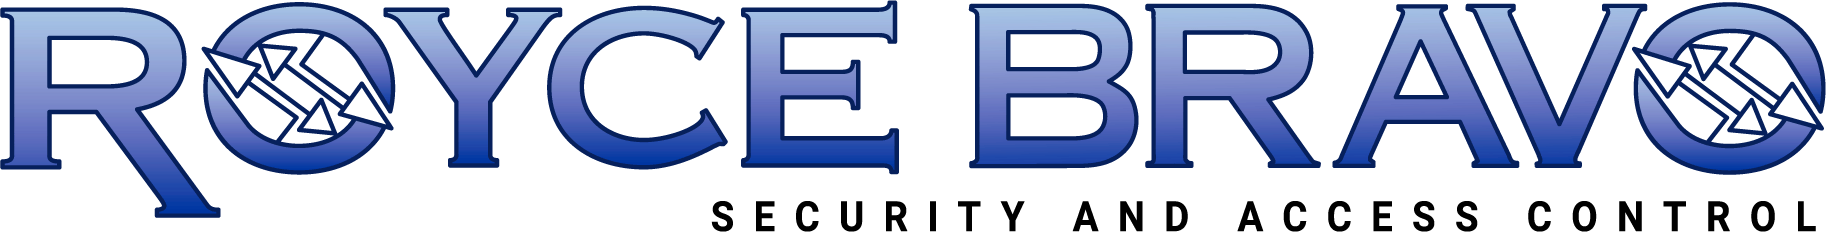 Royce Bravo Security and Access Control logo